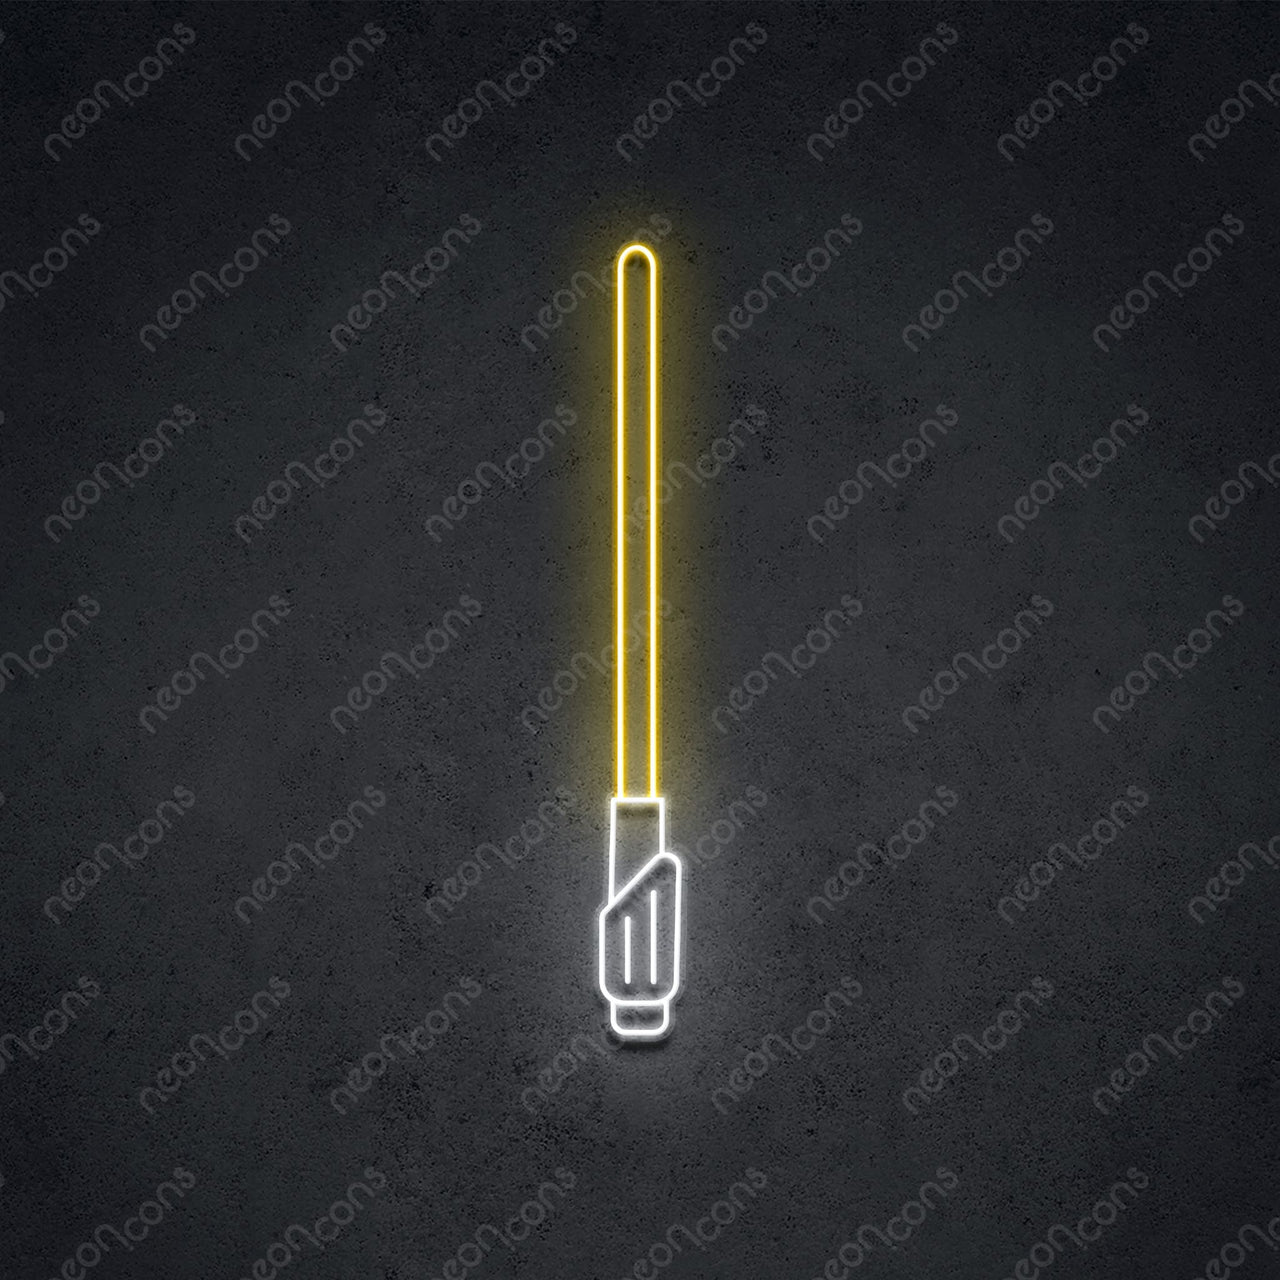 "Space Sword" Neon Sign 60cm (2ft) / Yellow / LED Neon by Neon Icons